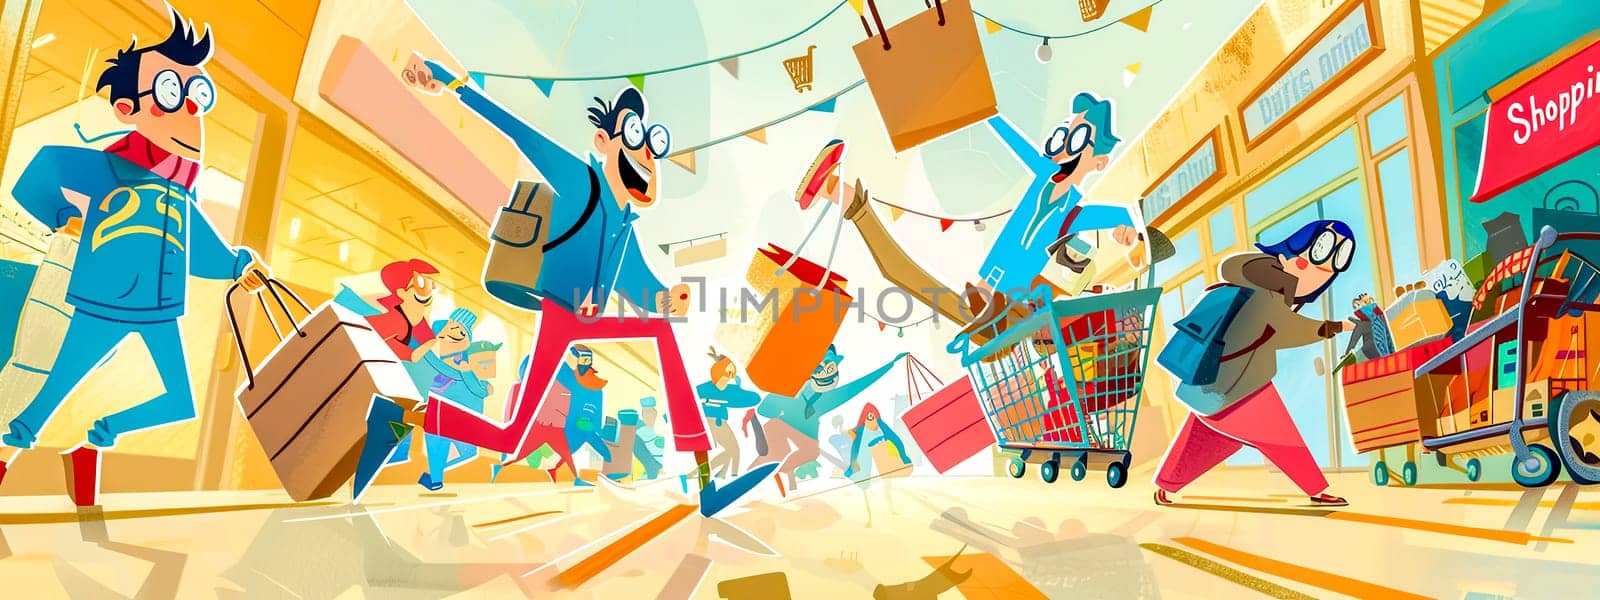 Dynamic shopping frenzy at a colorful mall by Edophoto